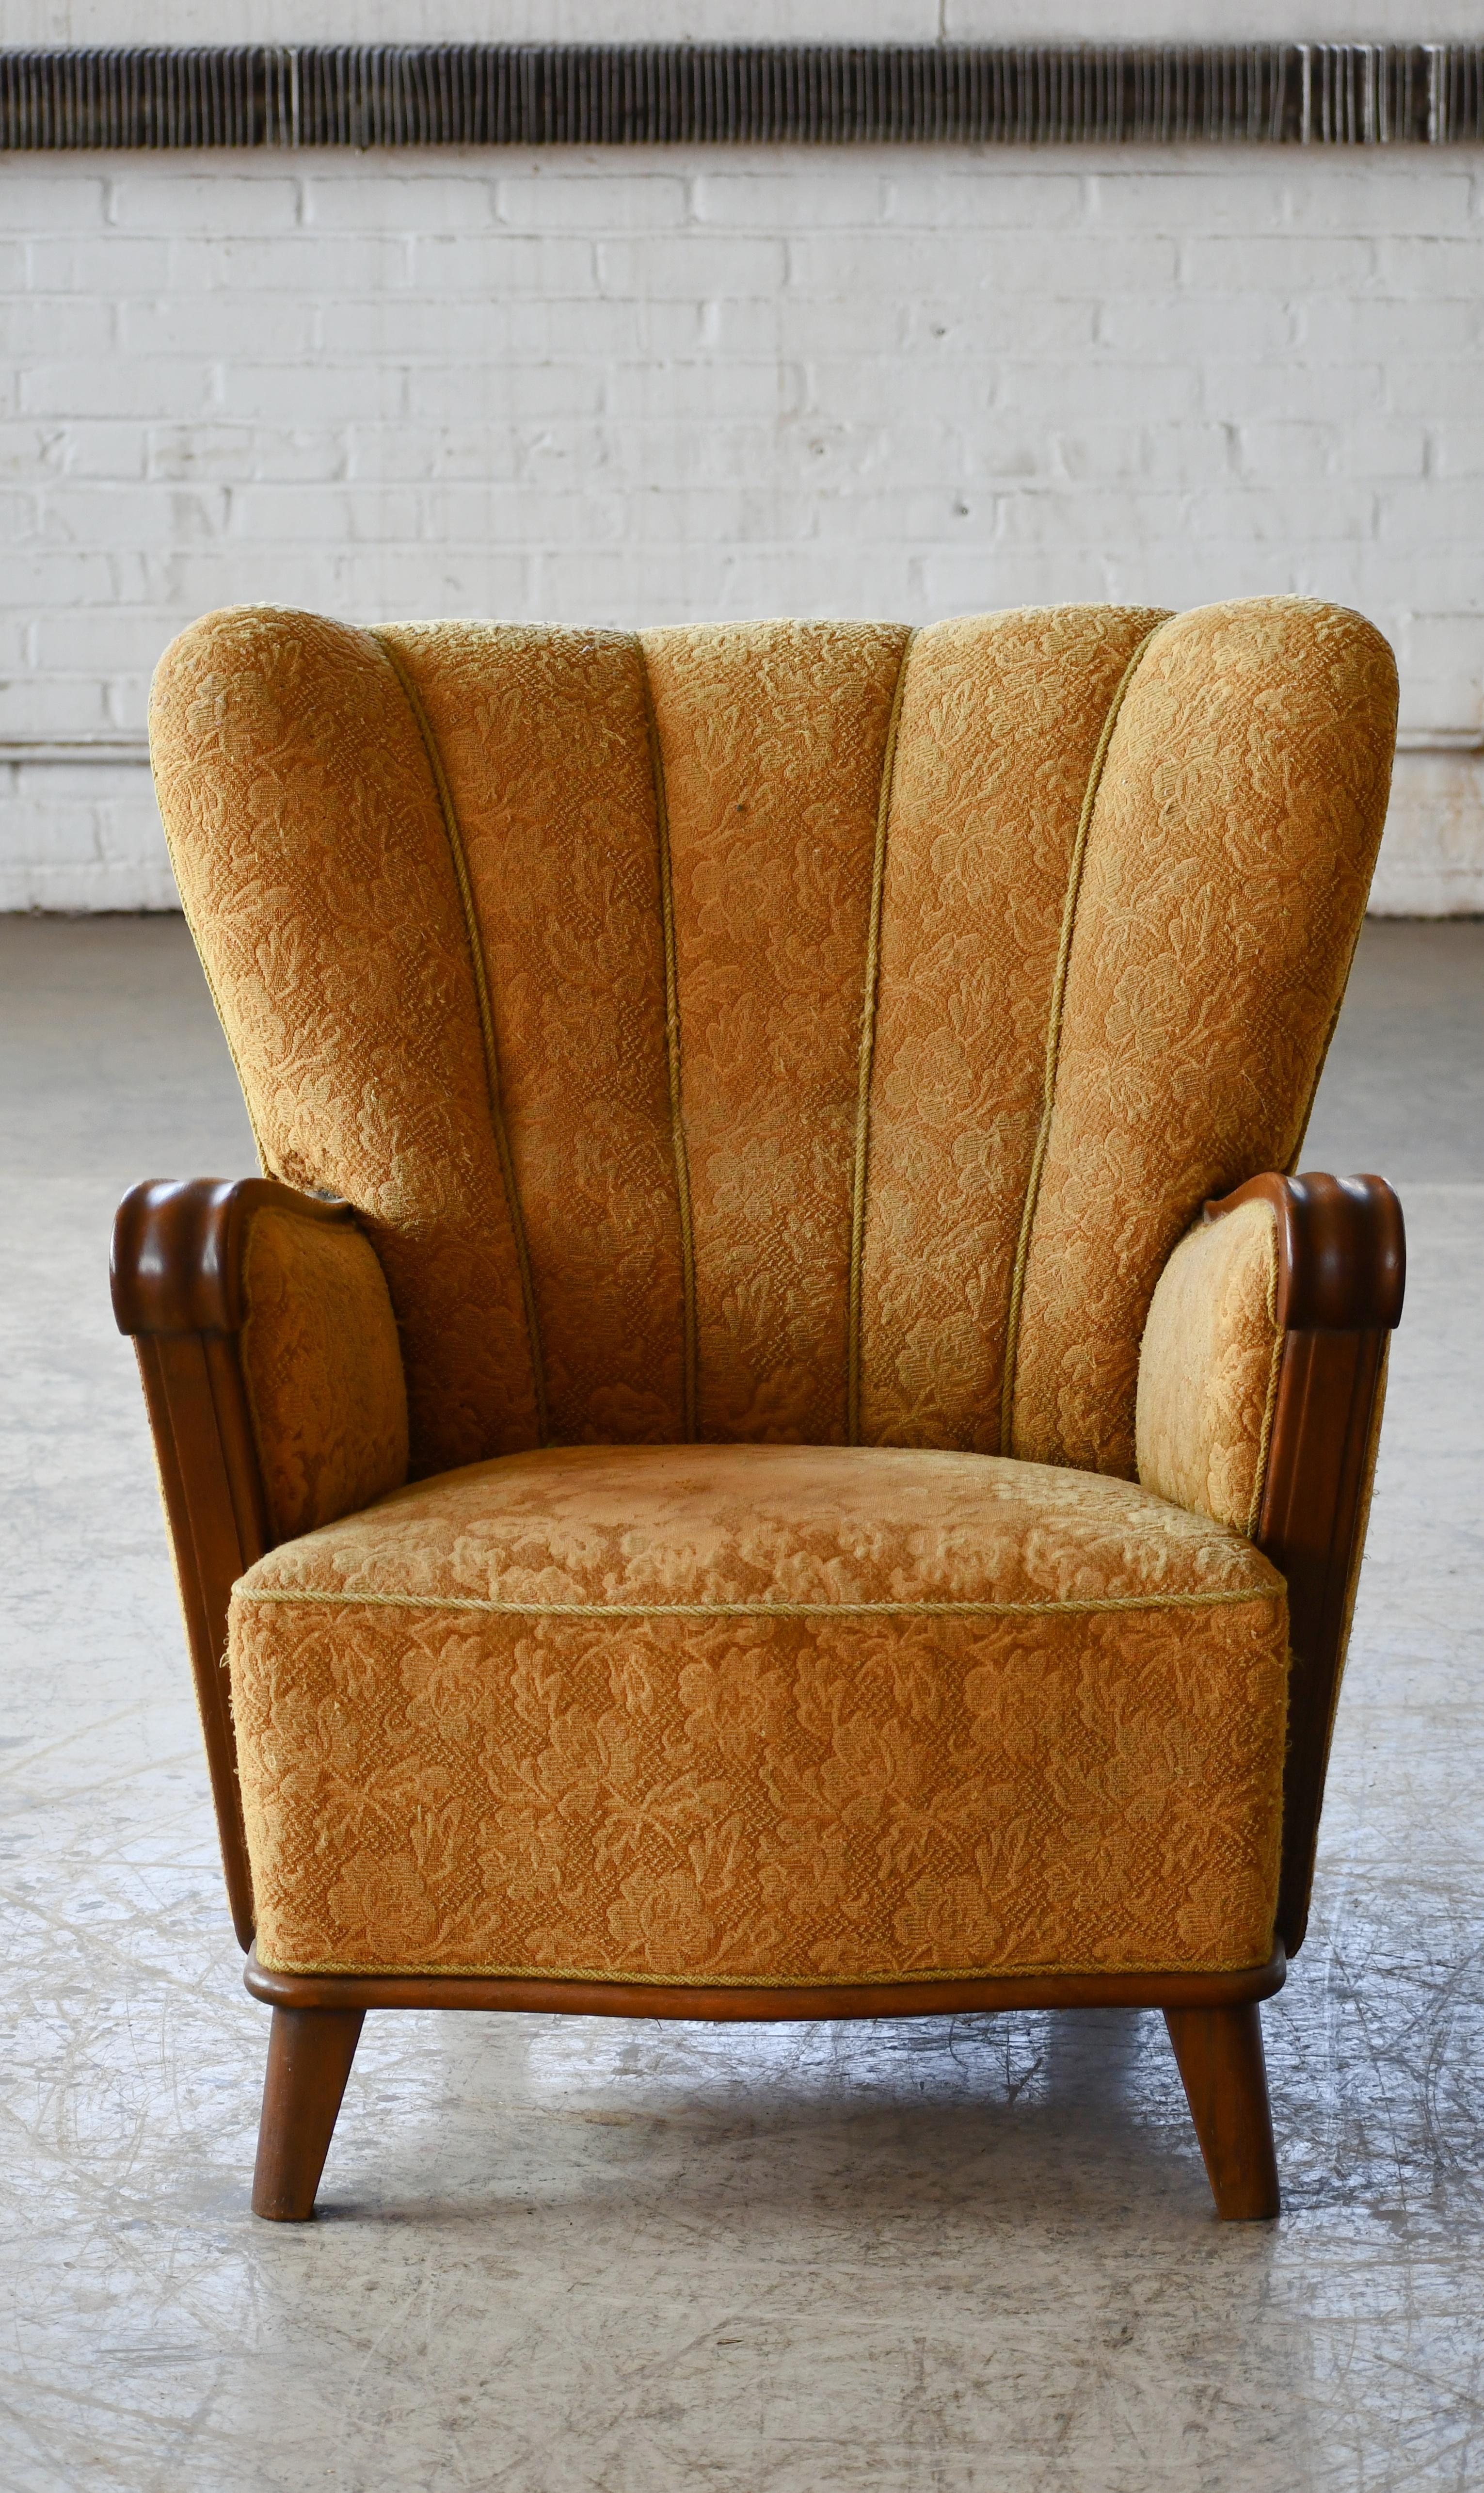 Exceptional ultra cool and comfortable mid-size Art Deco lounge chair made in Denmark probably around mid 1930's to early 1940's. Very rare find. We love the stance, scalloped backrests and carved wooden armrests. The chair has a very nice size